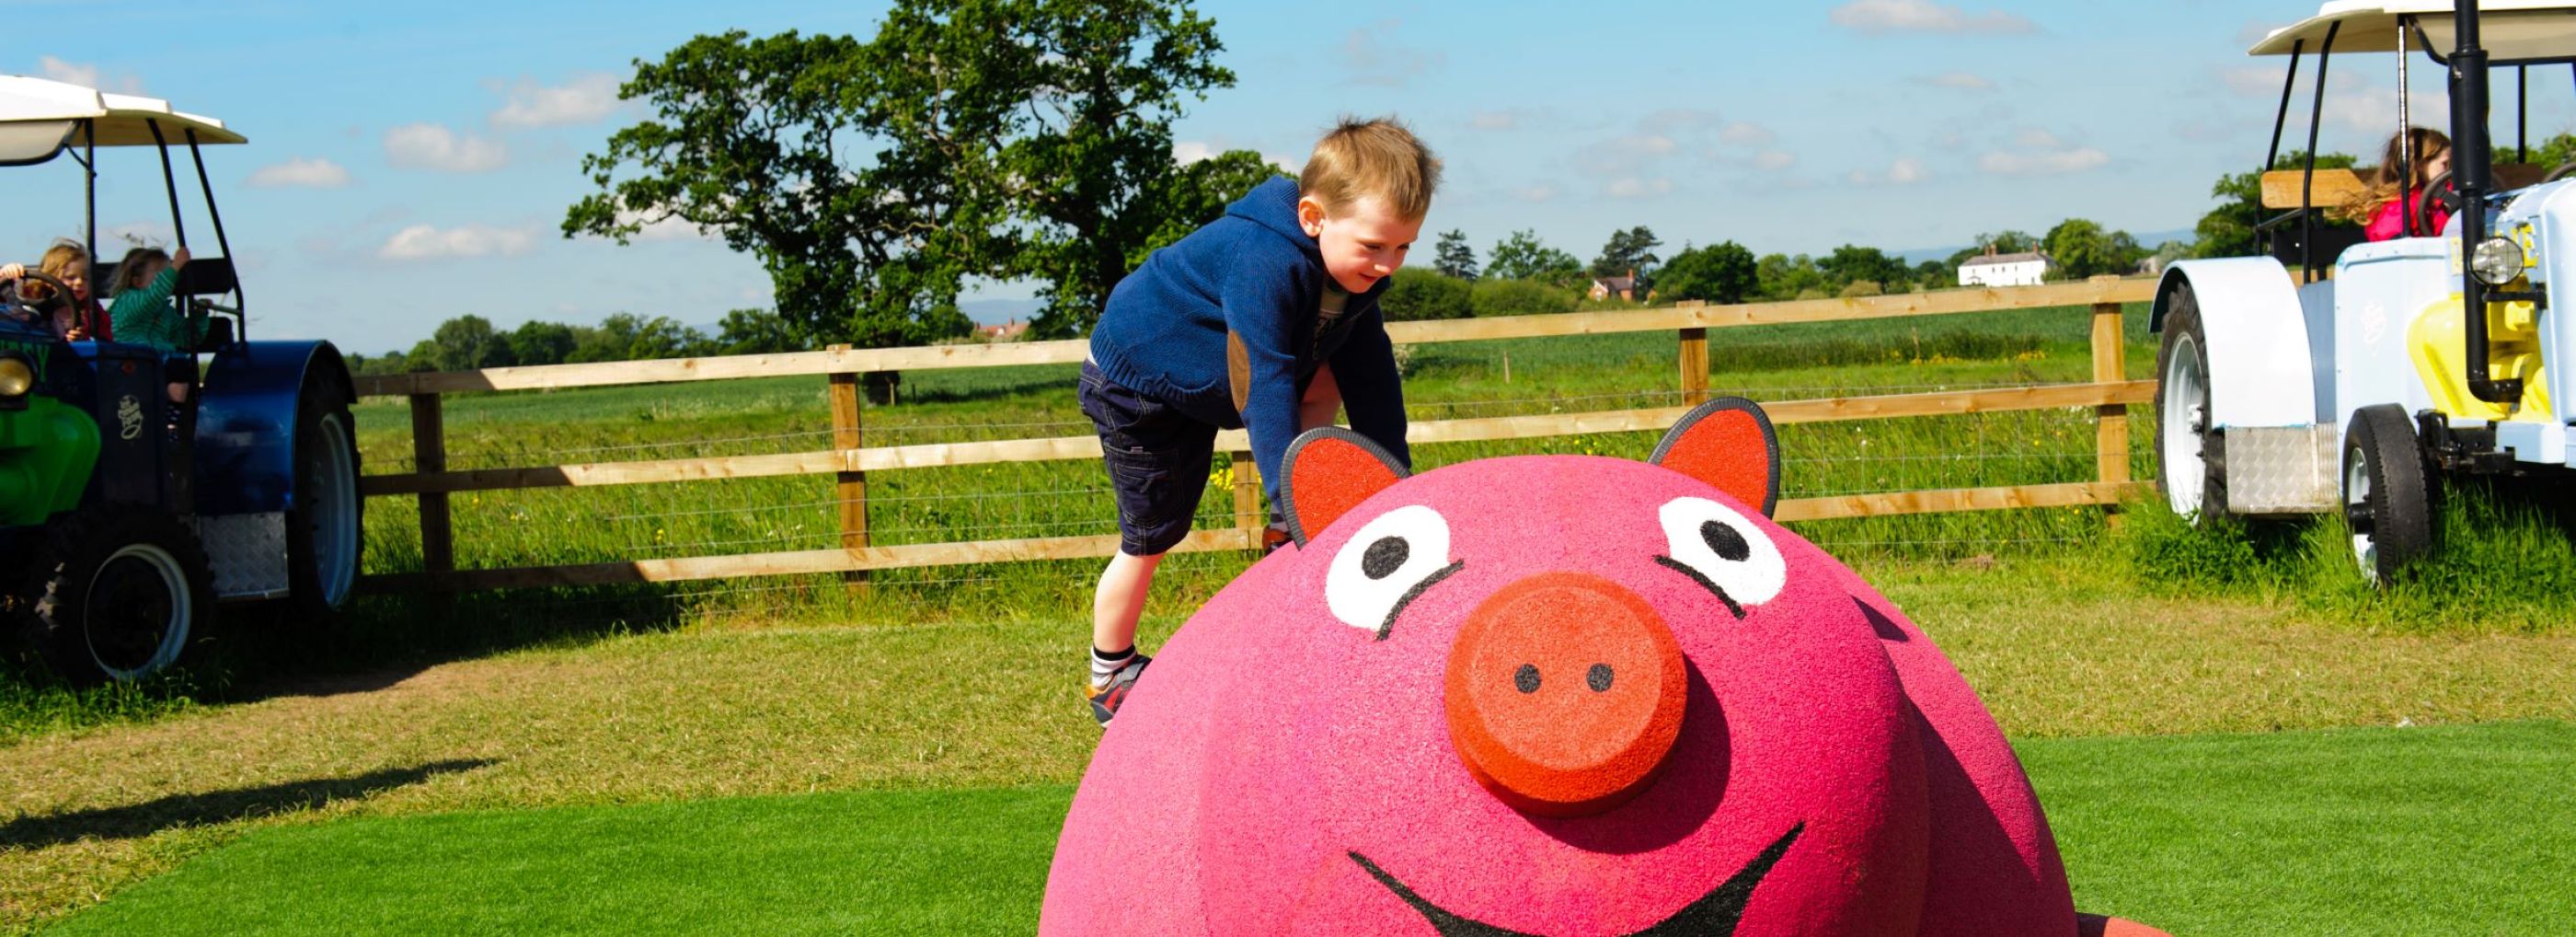 Young child climbing on a 3D climbing frame made to look like a pig.